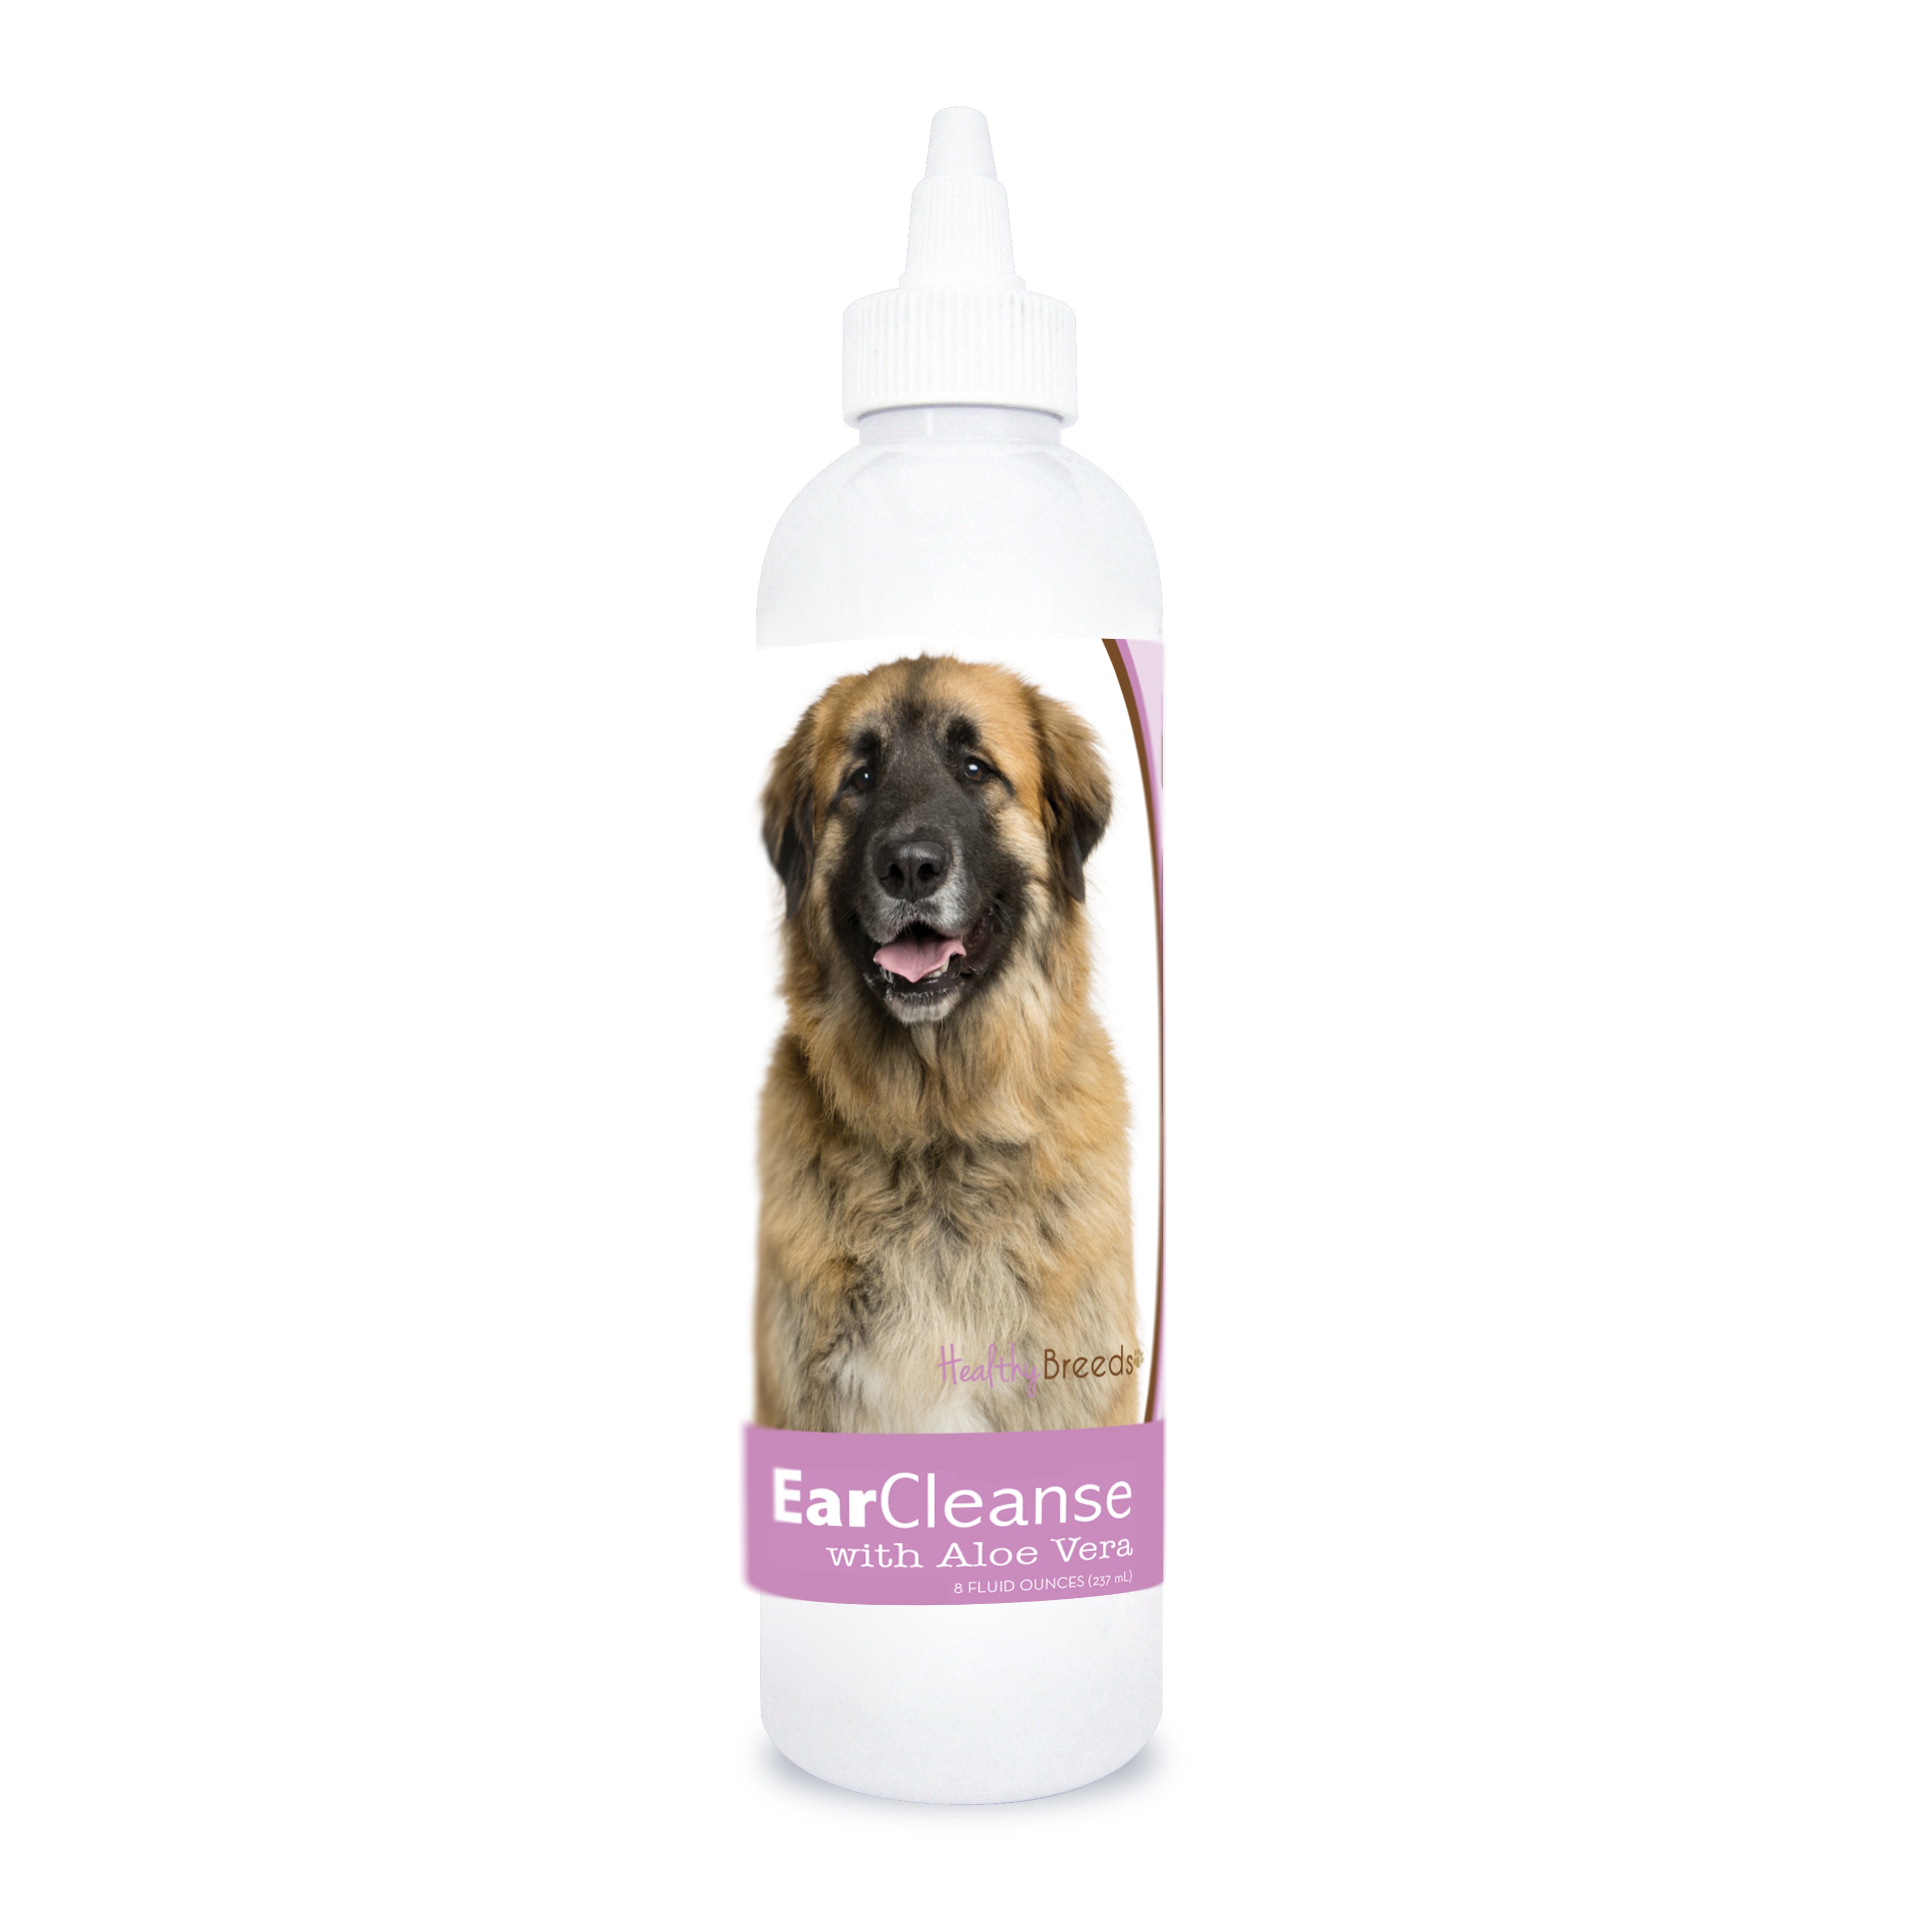 Leonberger Ear Cleanse with Aloe Vera Sweet Pea and Vanilla 8 oz